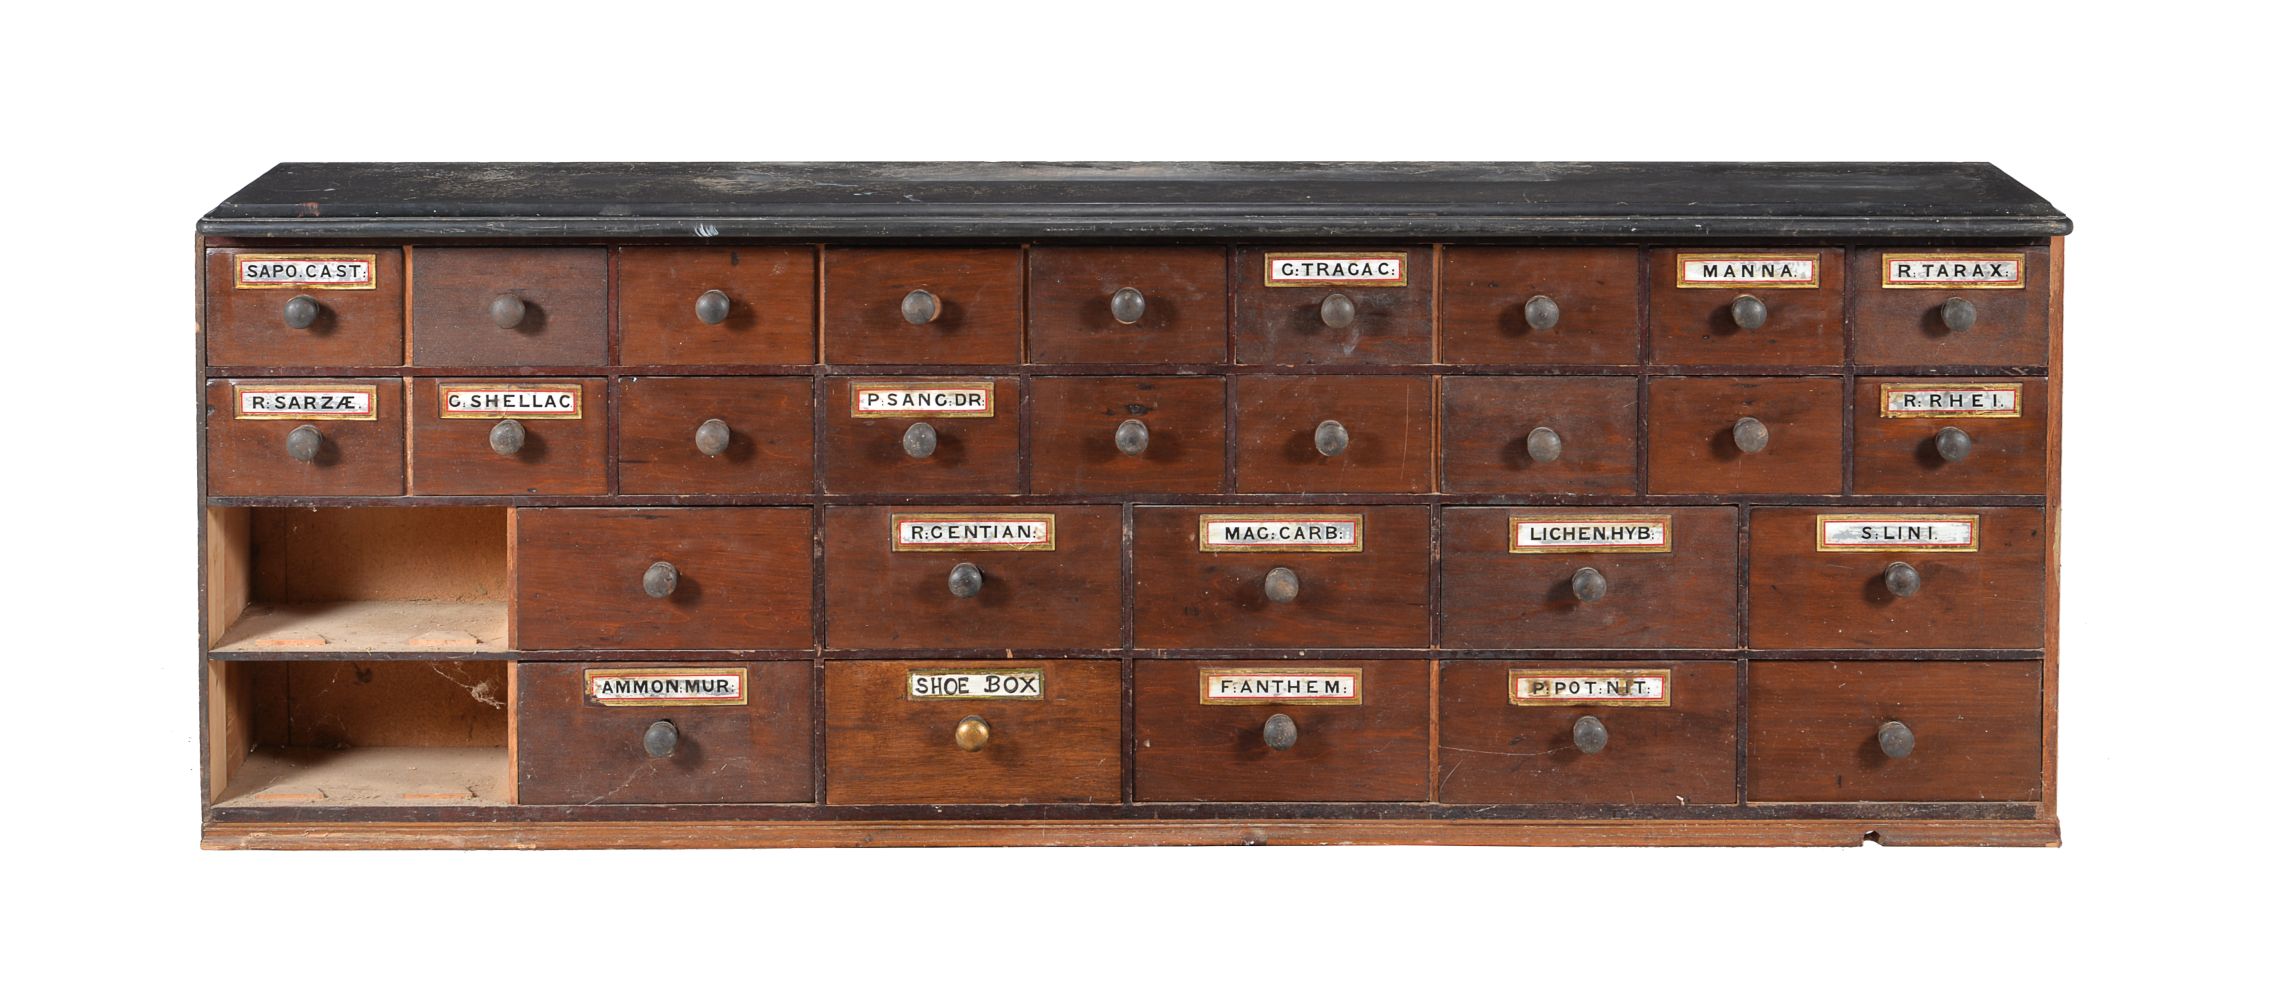 A mahogany apothecary cabinet with black marble top